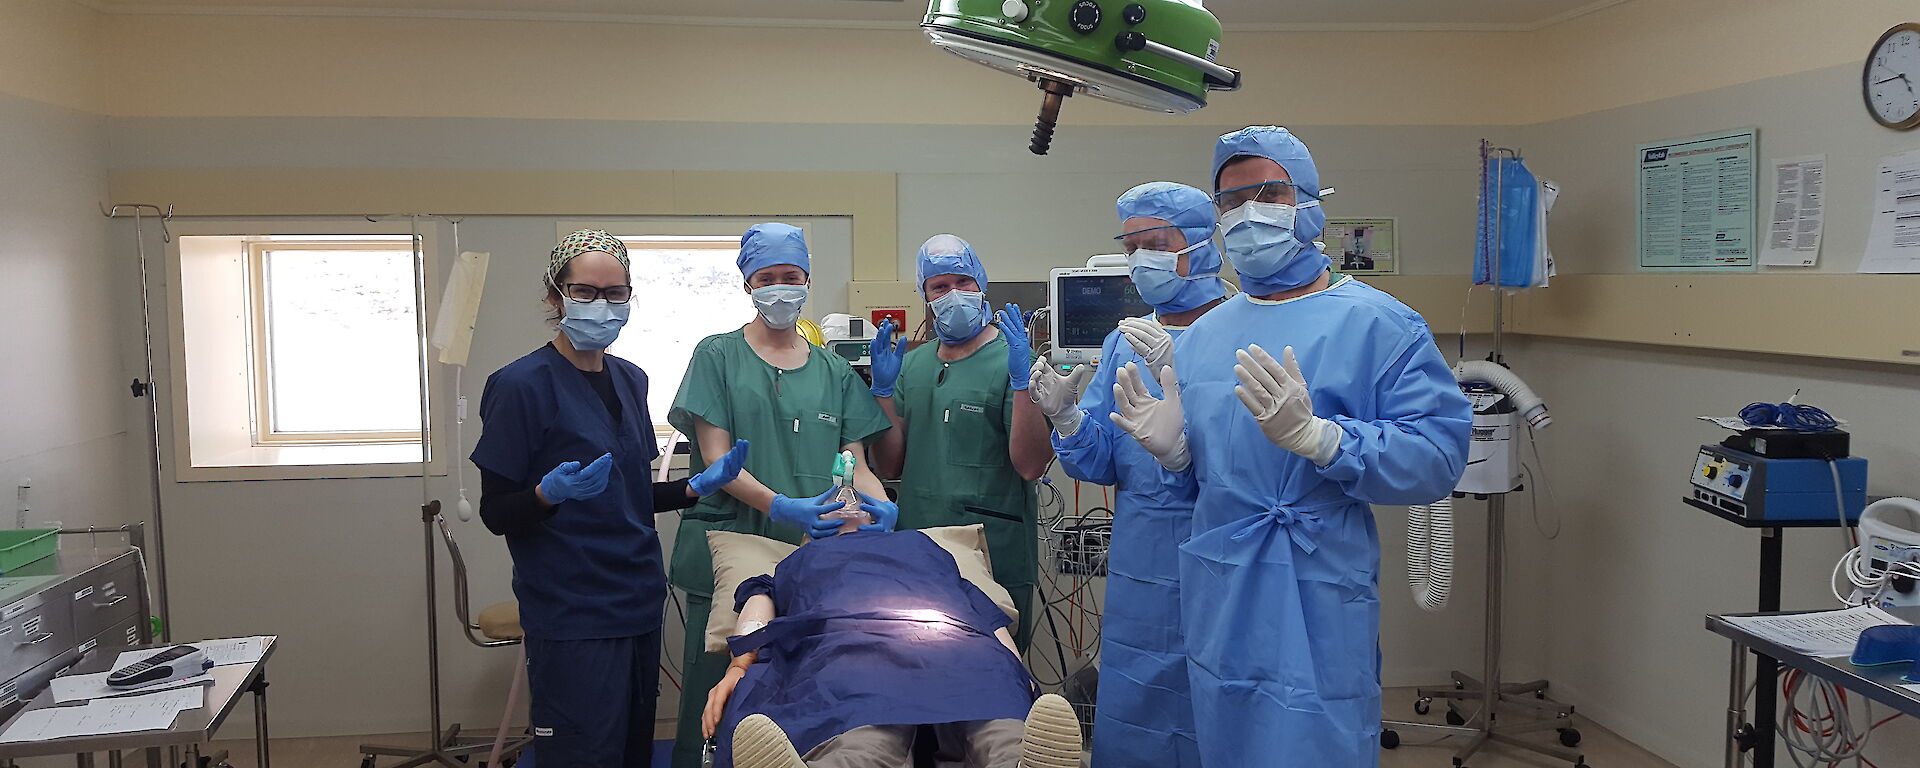 Bemused team asked to hold hands up “like doctors” in the operating theatre. Marissa, Amy, Garvan, Rhys and Aaron